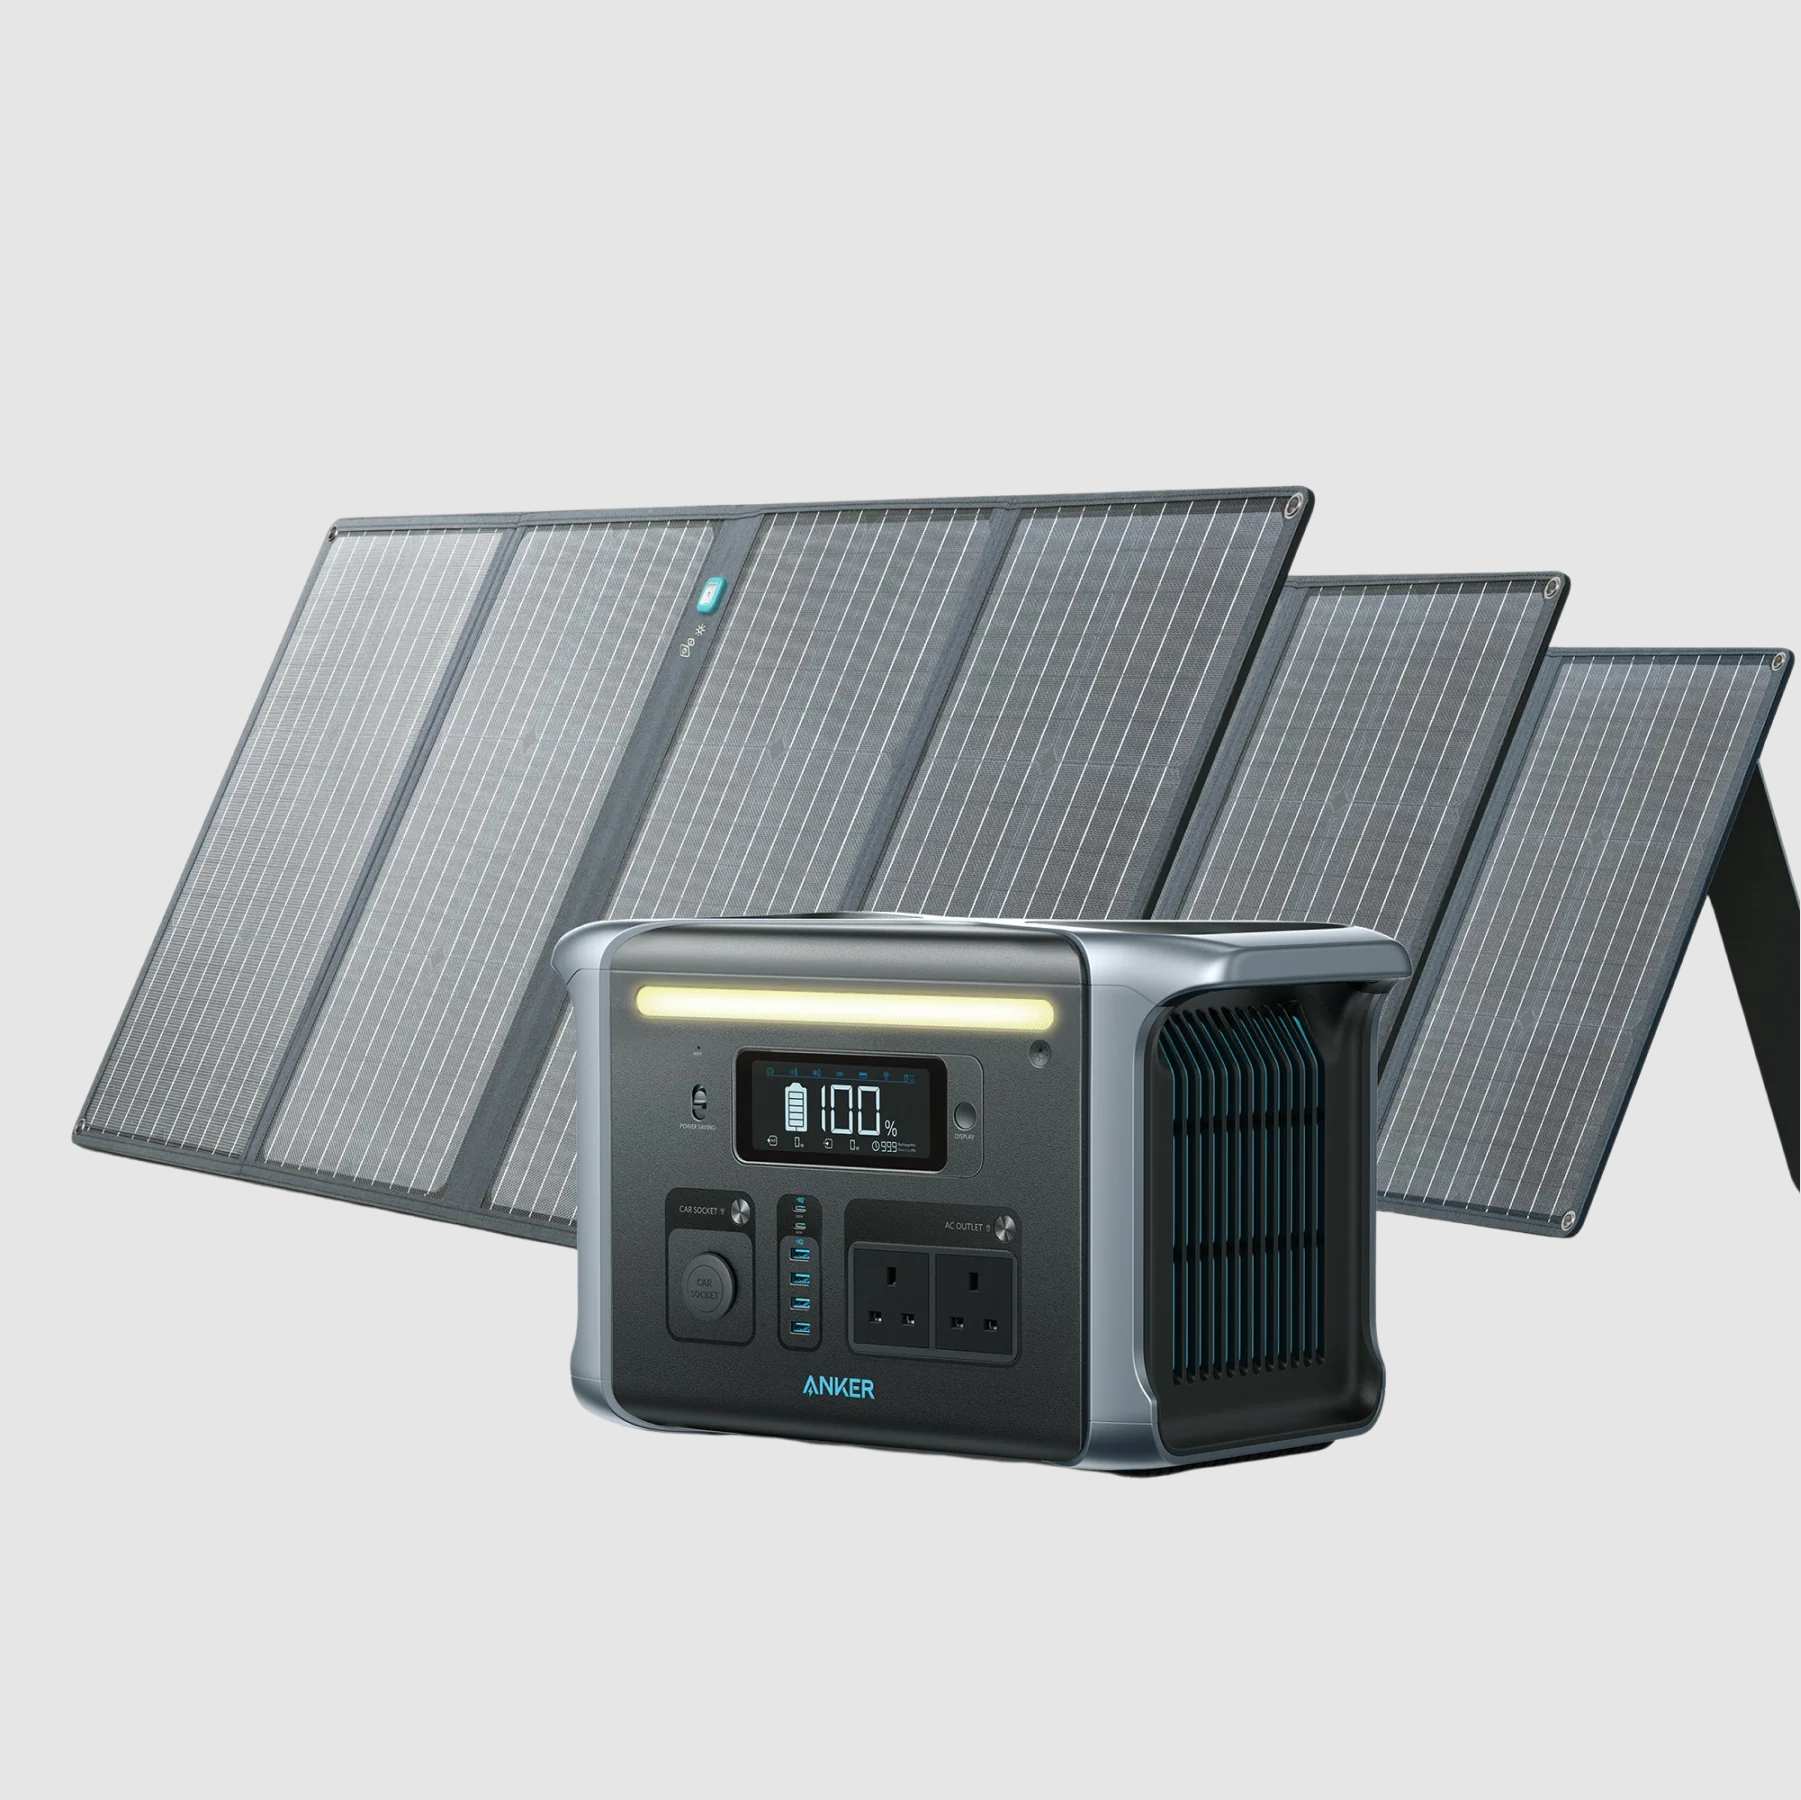 Anker Solar Generator 757 PowerHouse 1229Wh with Solar Panels 3*100W Anker Store coupon code